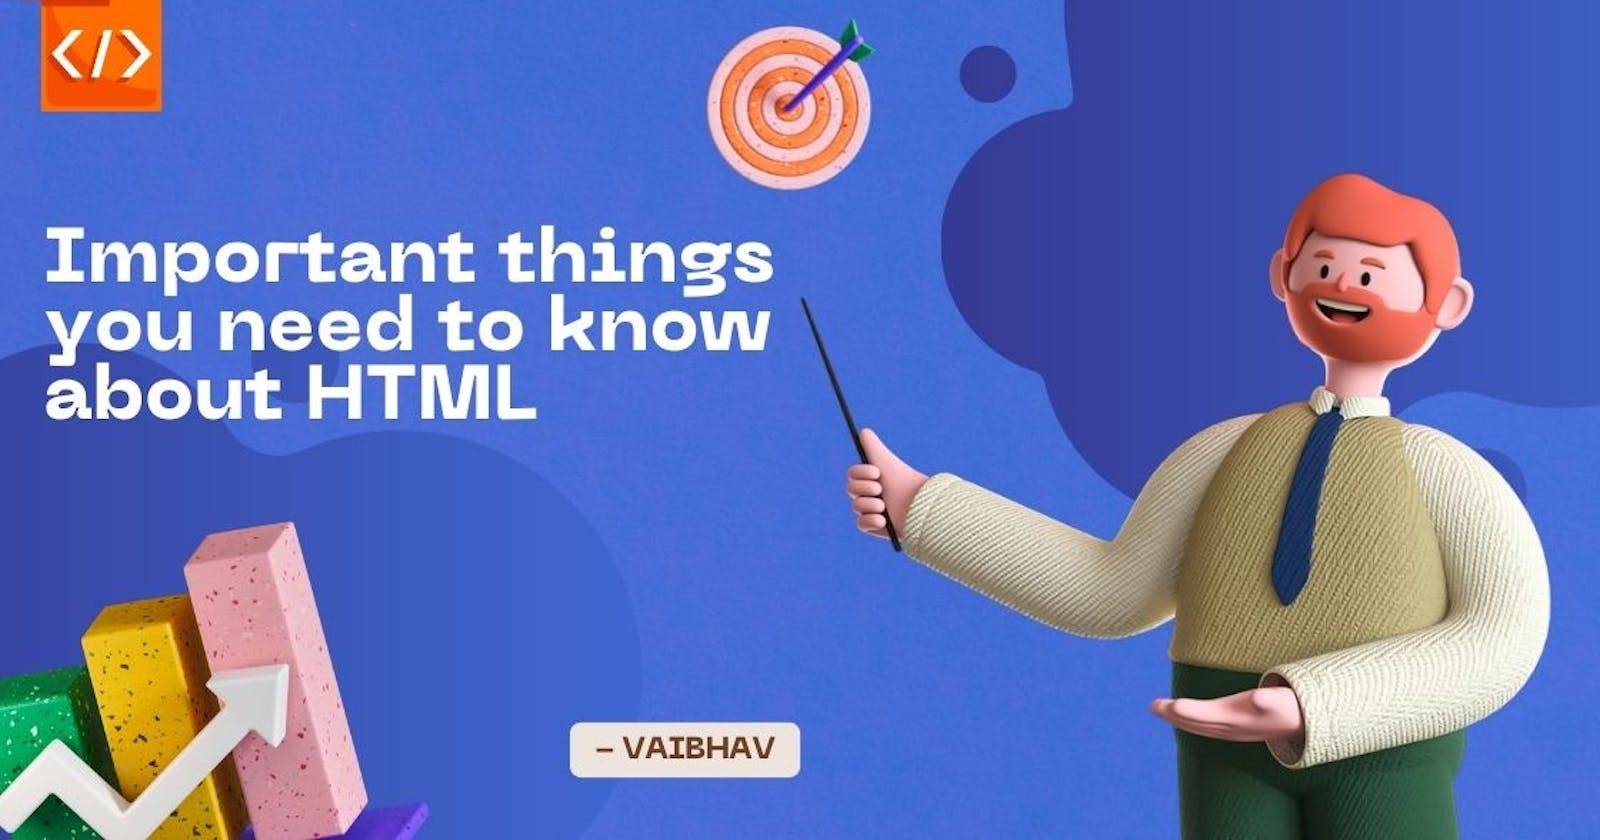 Important things you need to know about HTML